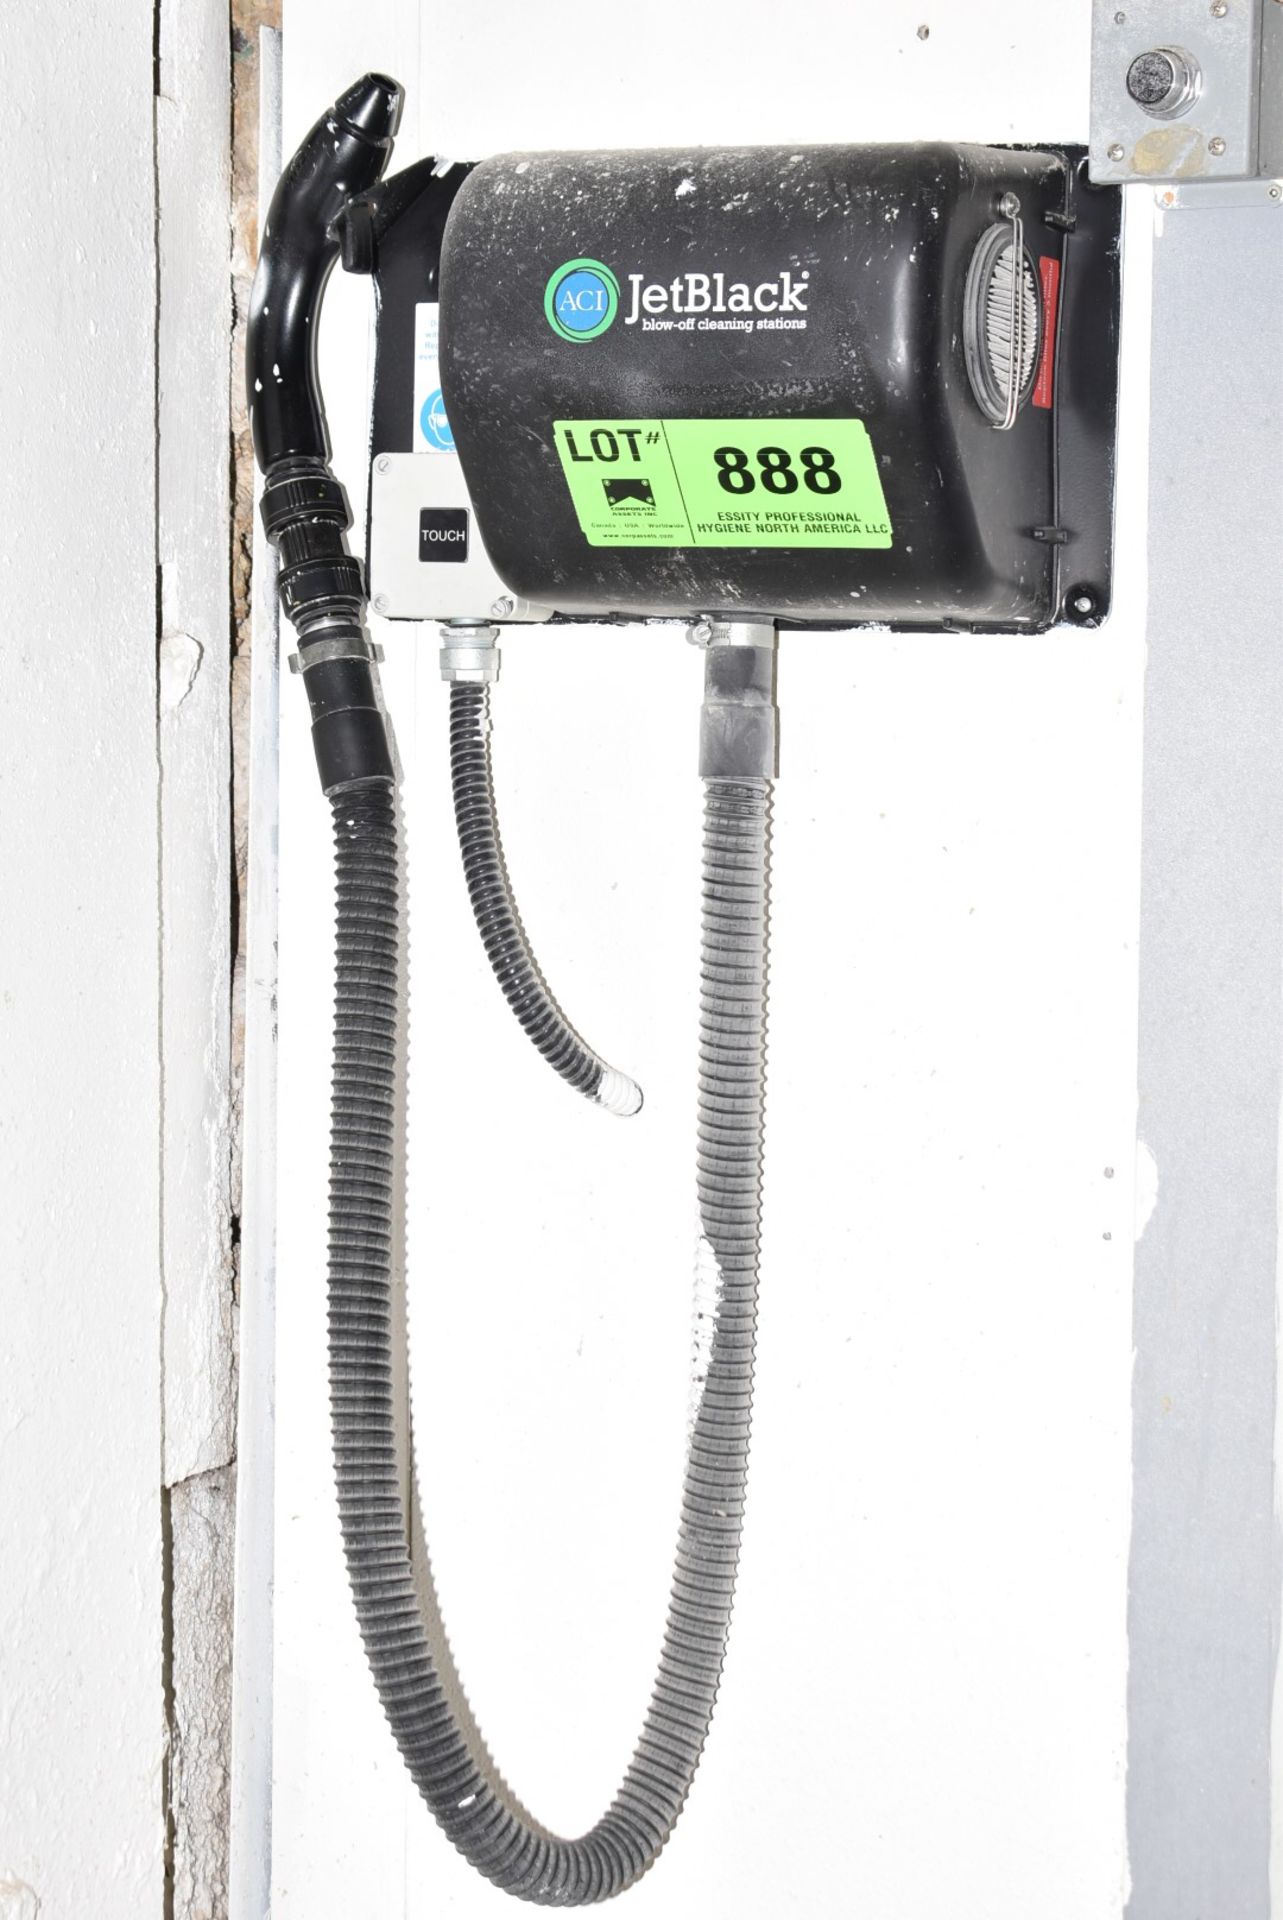 JETBLACK WALL MOUNTED SAFETY BLOW OFF STATION (CI) [RIGGING FEE FOR LOT #888 - $25 USD PLUS